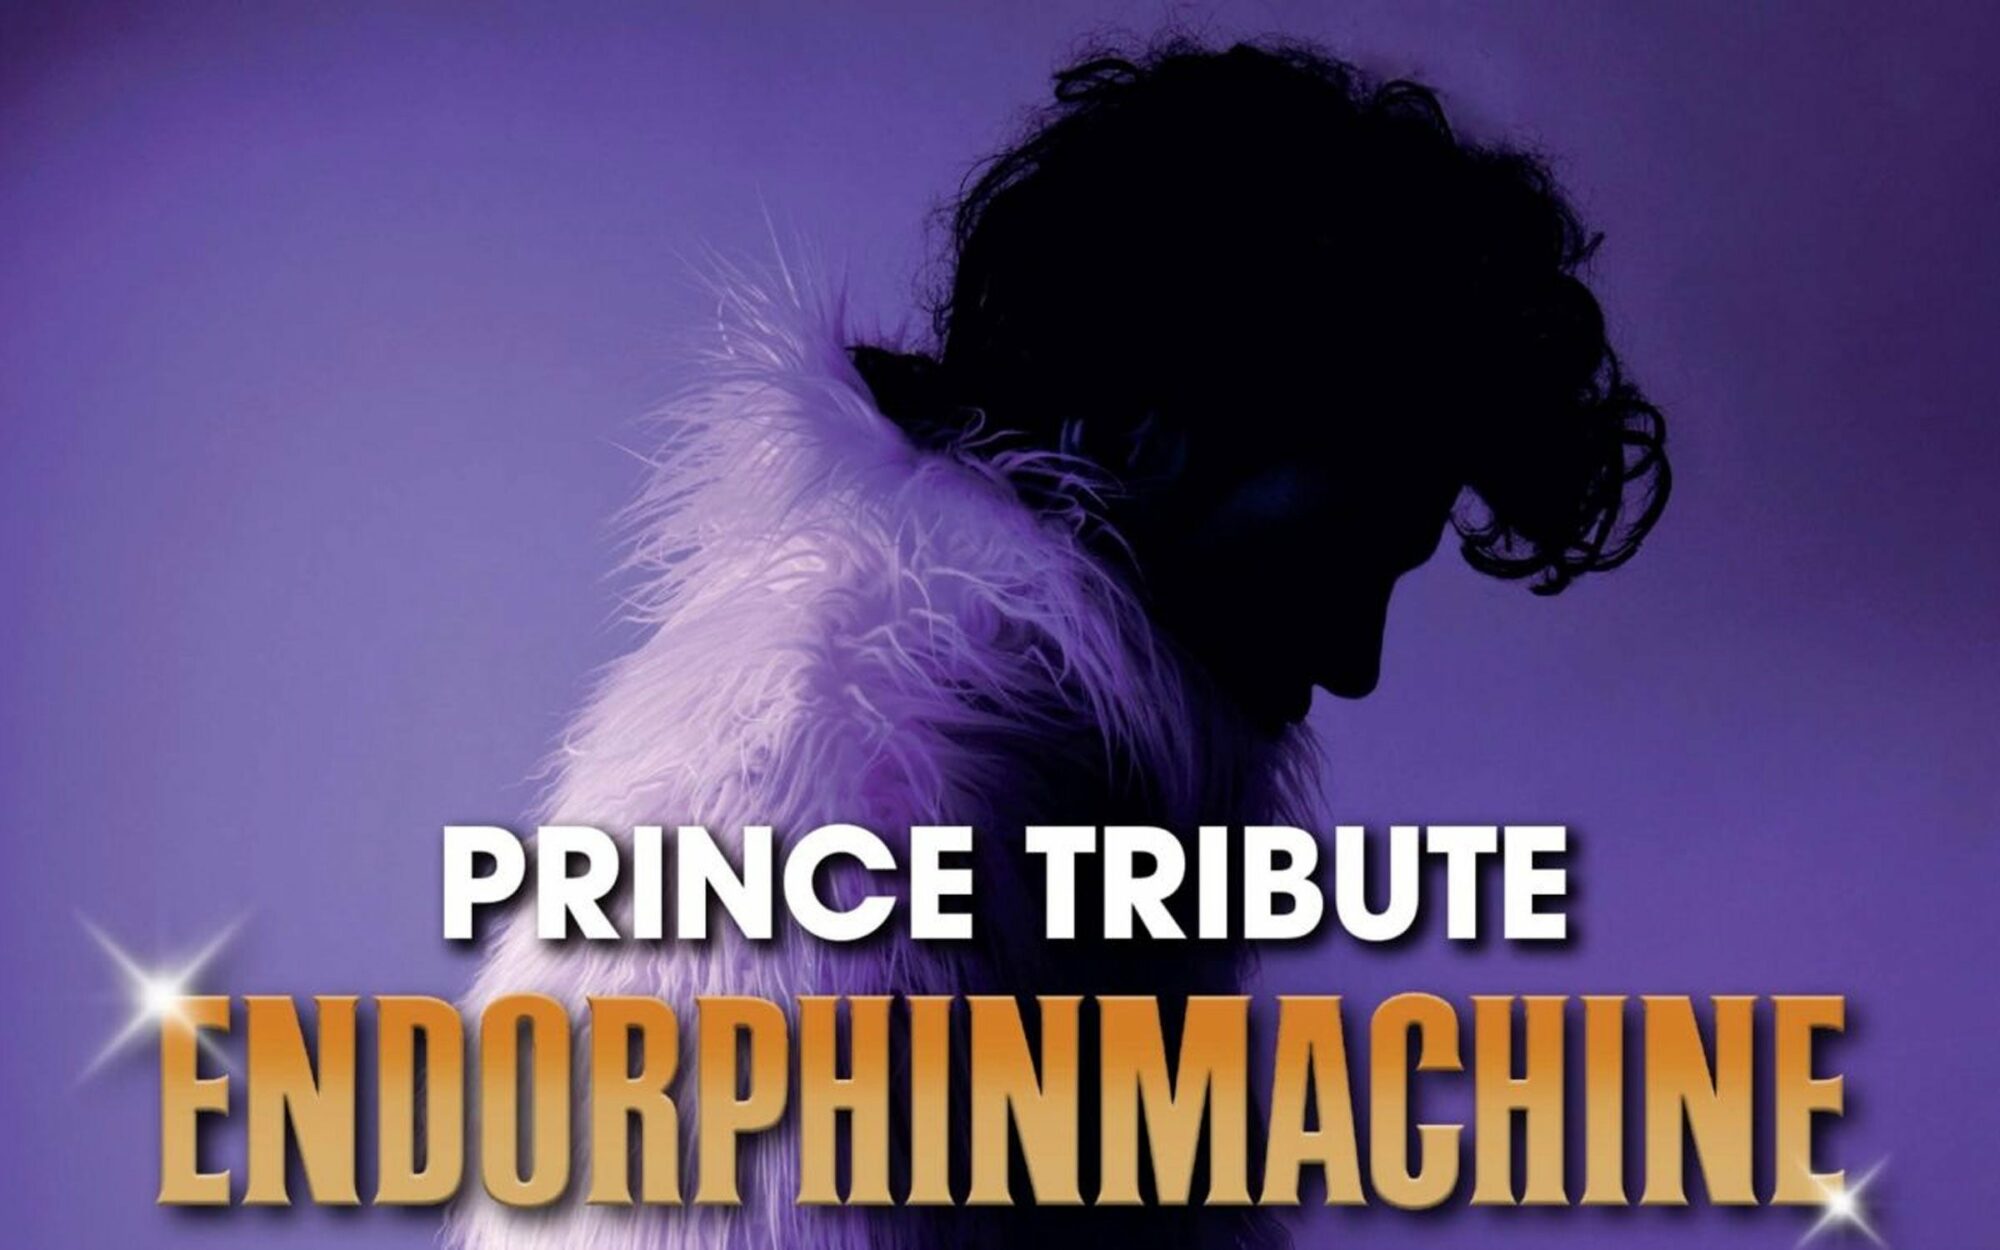 Image name Prince Tribute Endorphinmachine at O2 Academy2 Sheffield Sheffield the 27 image from the post Prince Tribute... Endorphinmachine at O2 Academy2 Sheffield, Sheffield in Yorkshire.com.